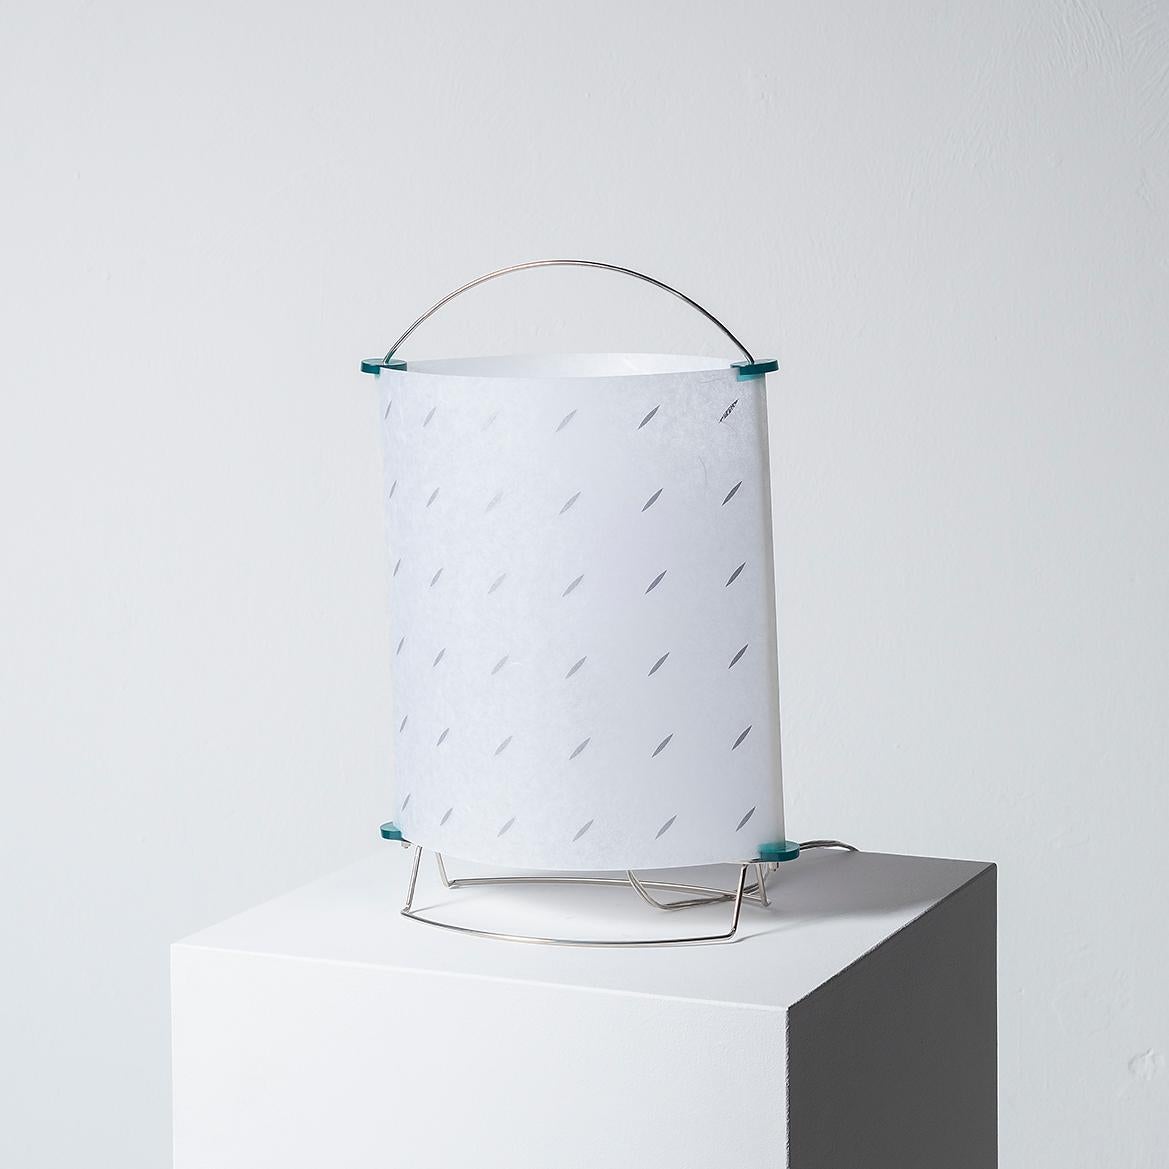 This lamp was designed by Masunori Umeda and manufactured by Yamagiwa Edition in 1996. It is the model n°S2473 from the ‘Be-Andon’ collection with original box and label.
Dimensions: W 28 × D 13 x H 42 cm
Material: Chromed metal, plastic and printed